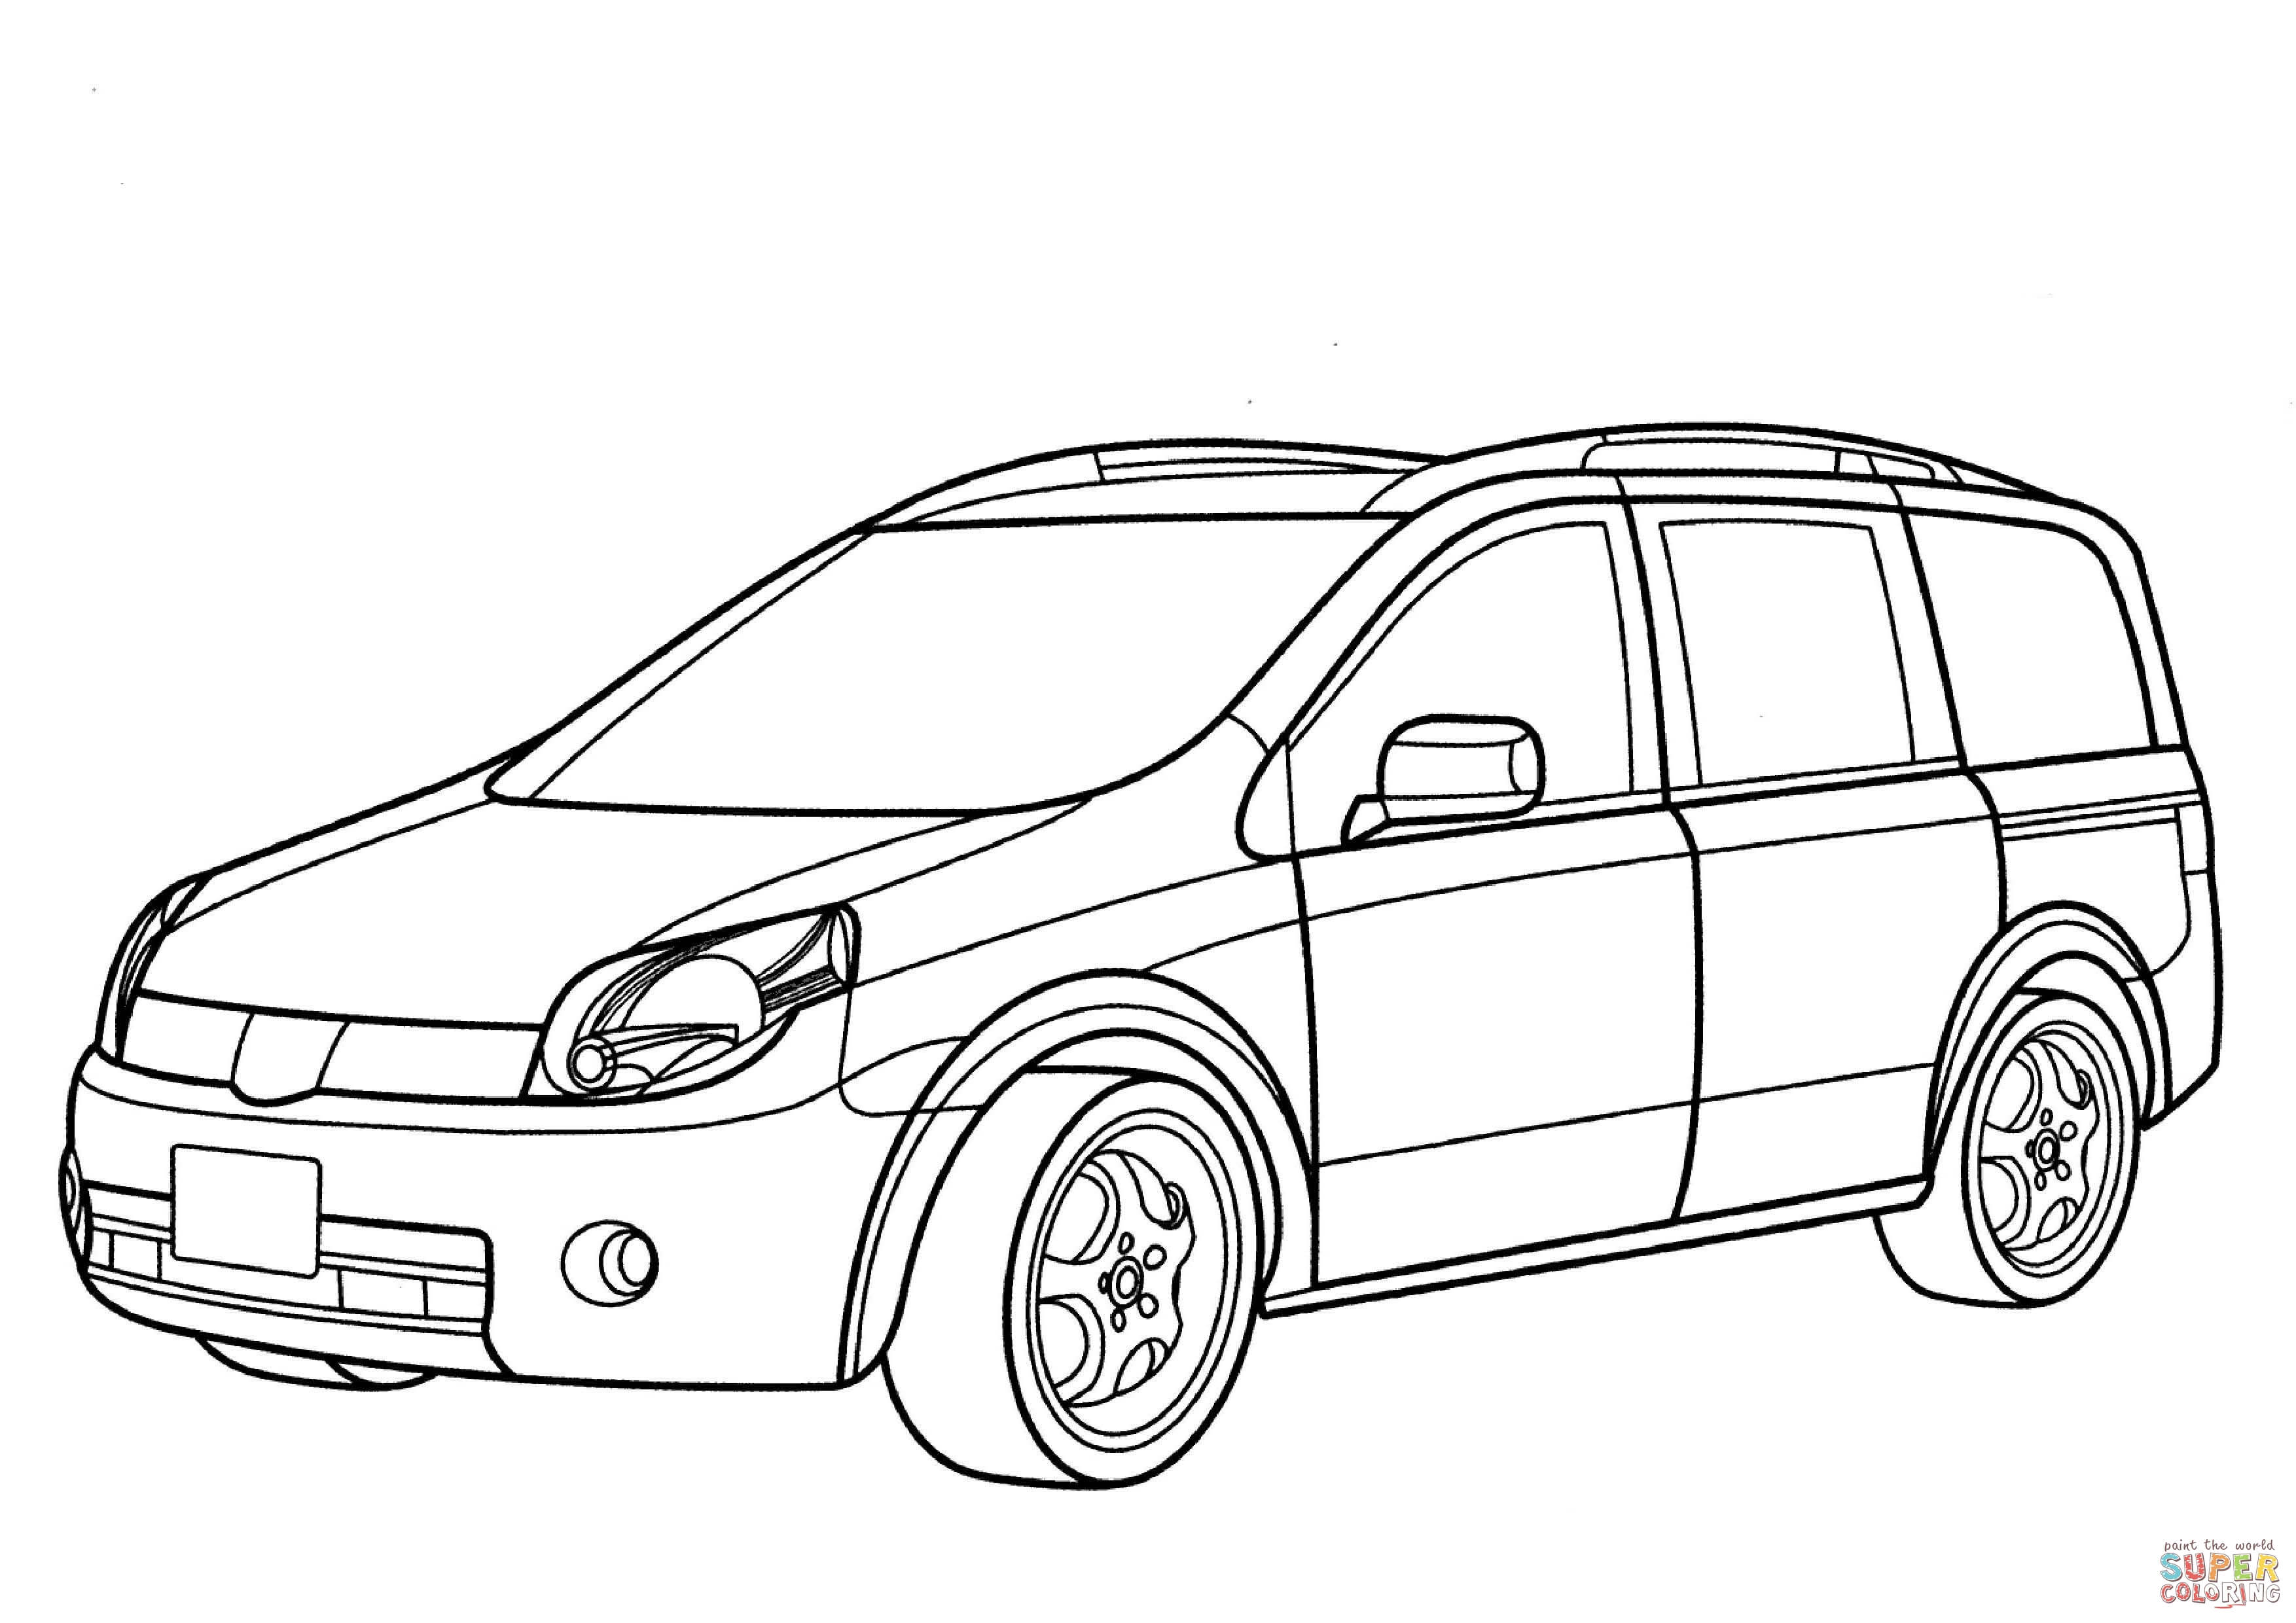 Nissan Lafesta Minivan coloring page | Free Printable Coloring Pages